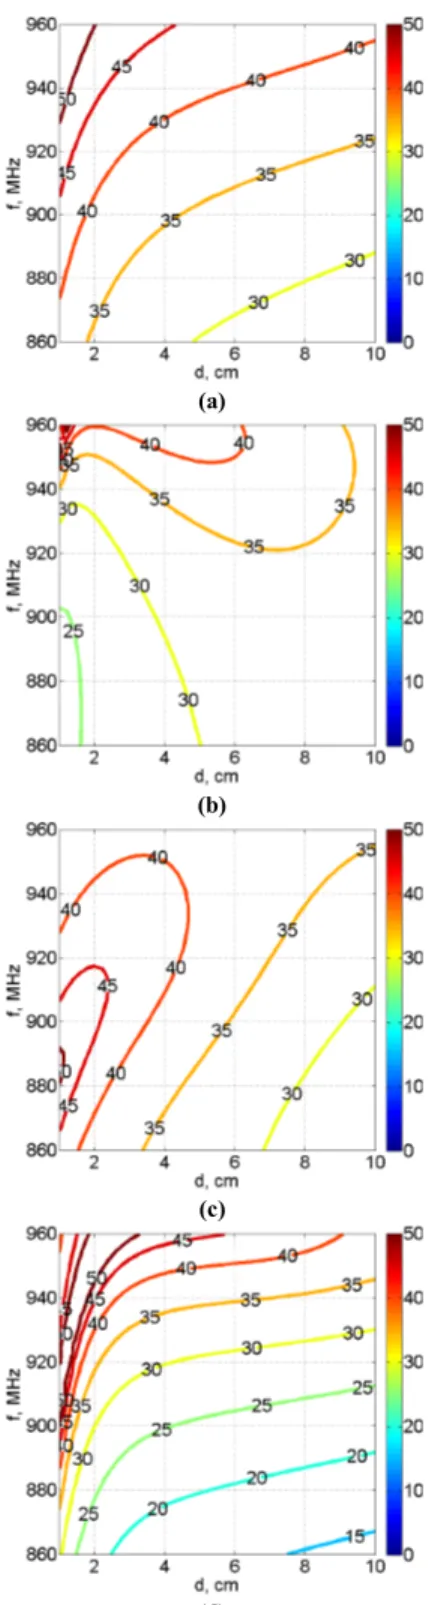 Fig.  3.6  -  Contour  plot  of  the  mutual  impedance  Z 21   versus  distance  and  frequency  for  the  NF-UHF  RFID  system configurations: (a) Loop/UH100, (b) Patch/UH100, (c) Slot/UH100 and (d) UH100/UH100